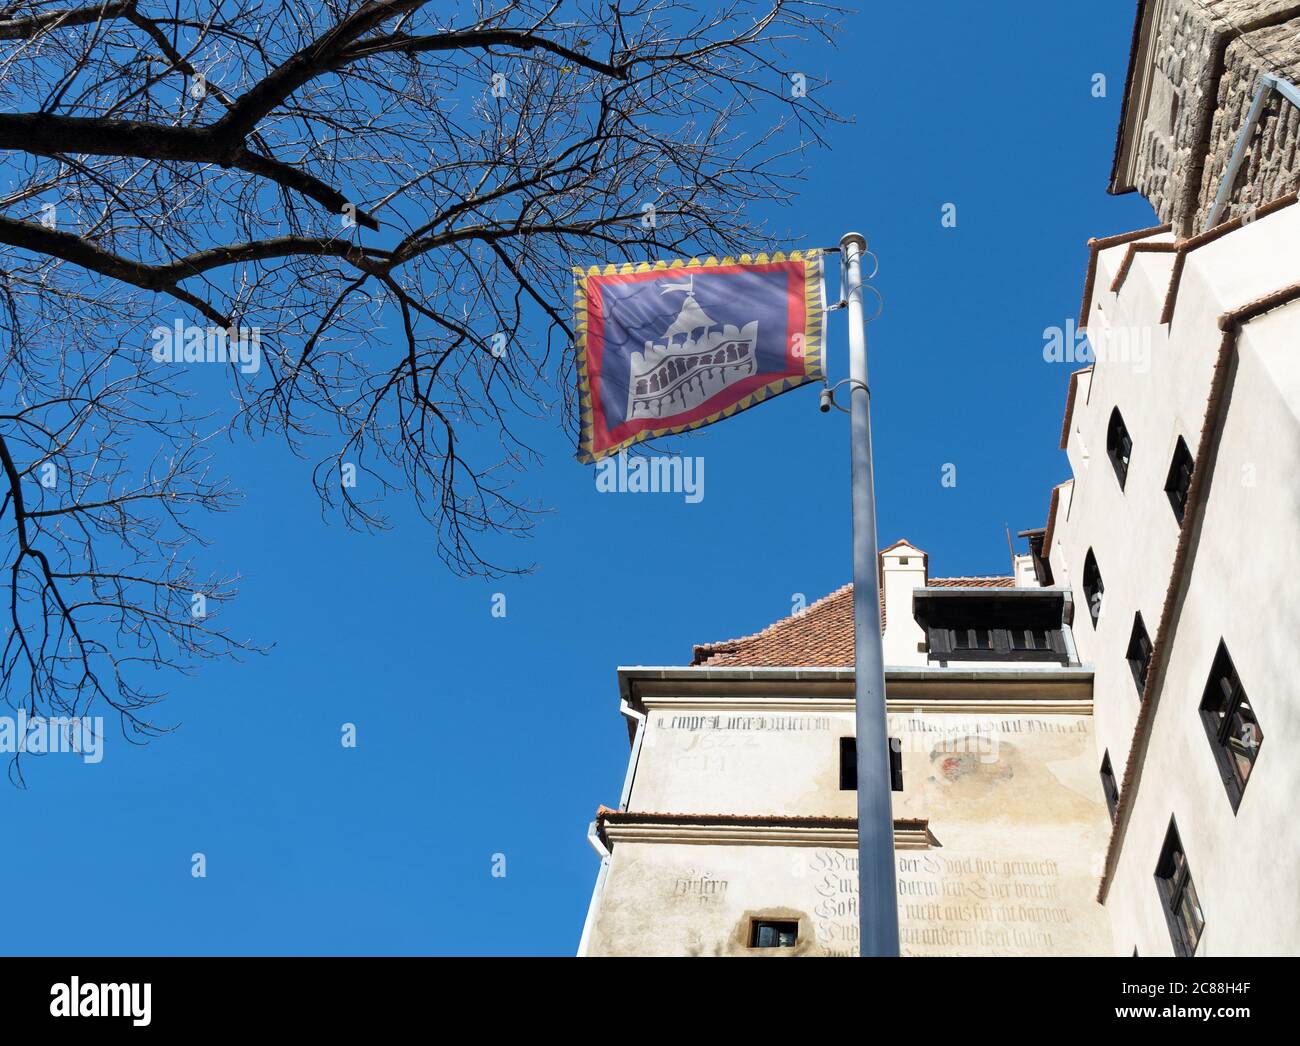 Bran castle flag in front of main entrance against blue sky background. Stock Photo